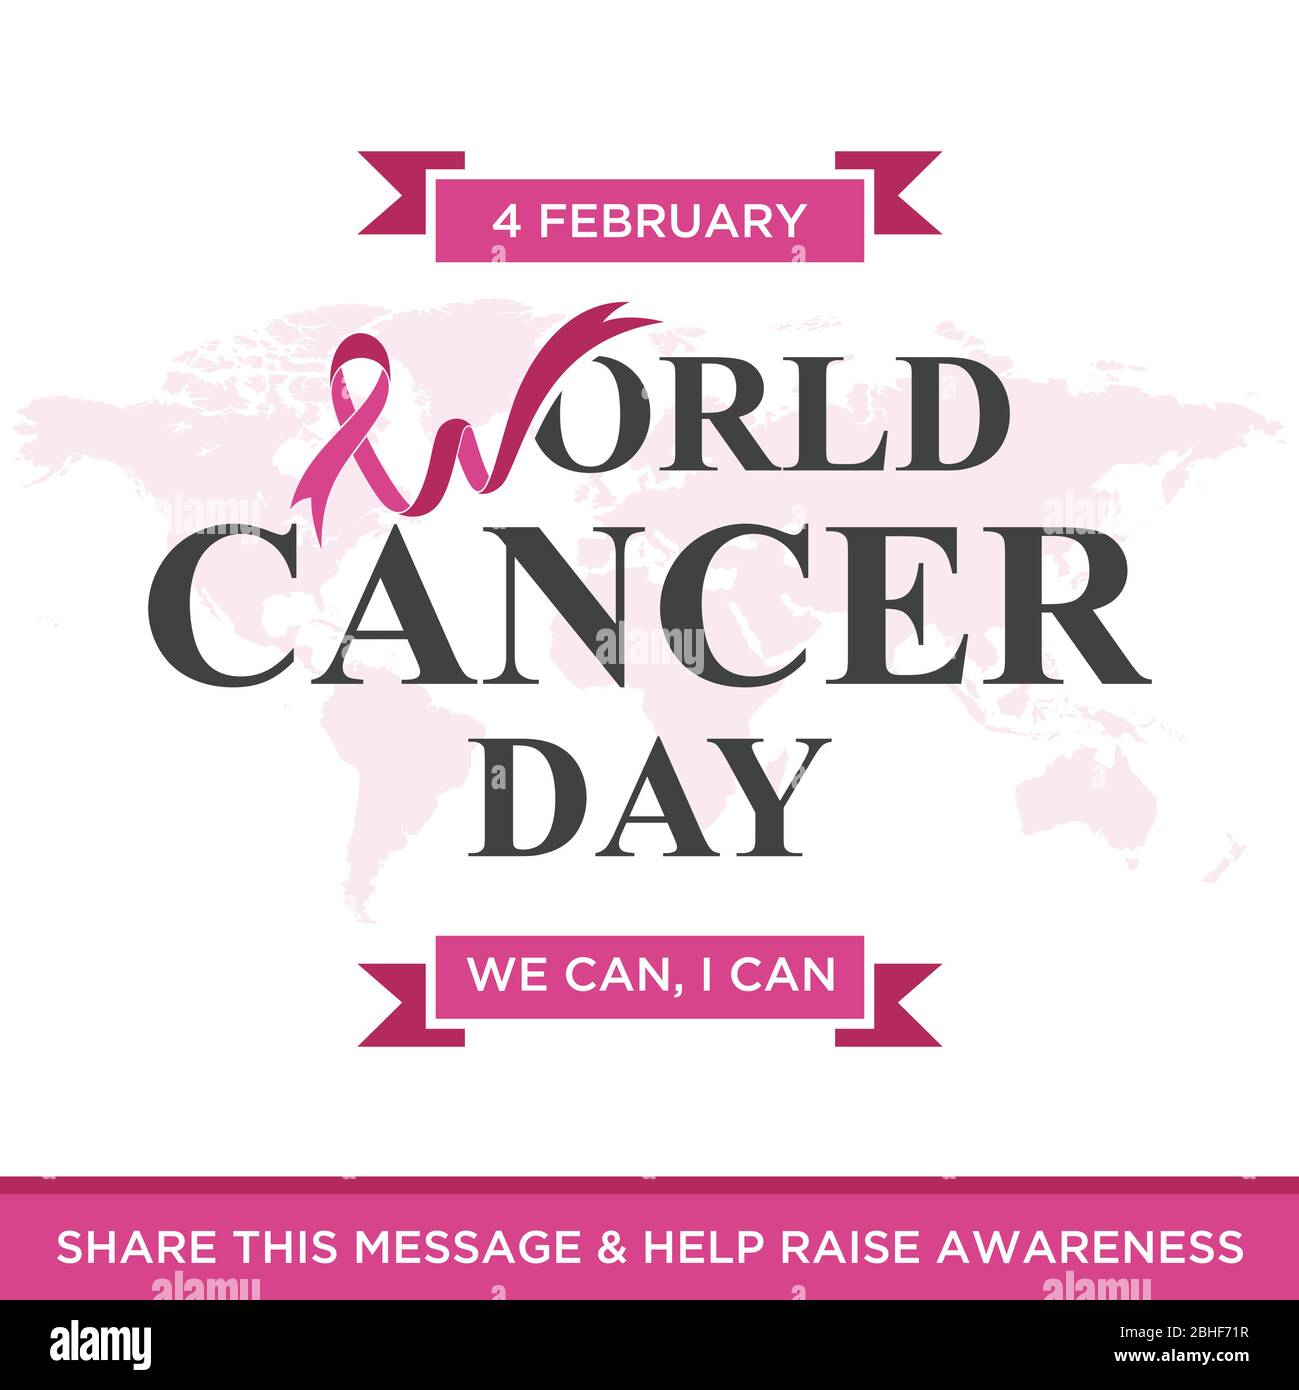 World cancer day lettering element design with purple color ribbon on white background. Vector illustration of World Cancer Day with ribbon and text. Stock Vector